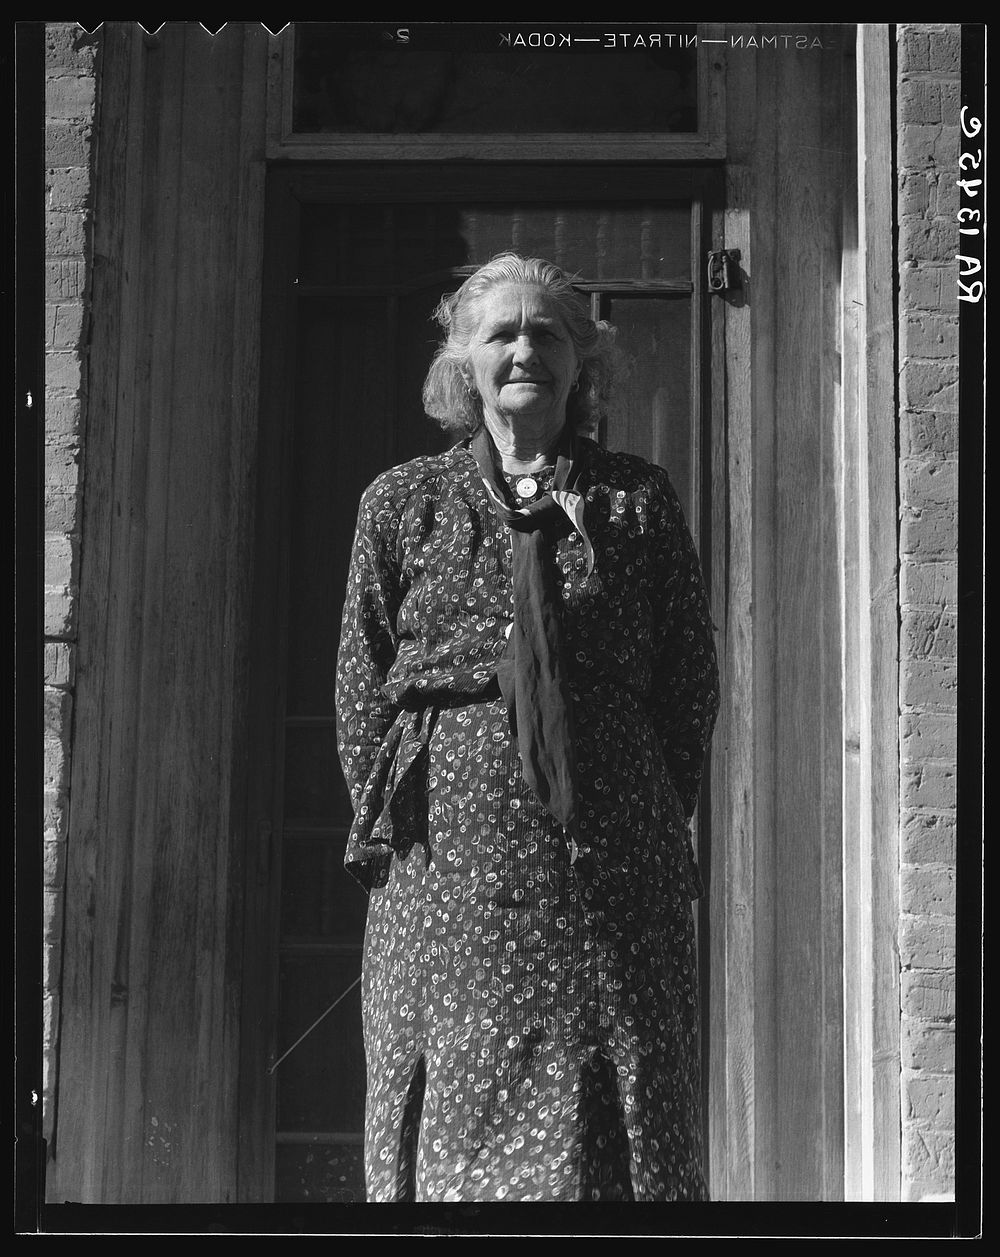 First schoolteacher of Escalante, Utah. Eighty-five years old. Sourced from the Library of Congress.